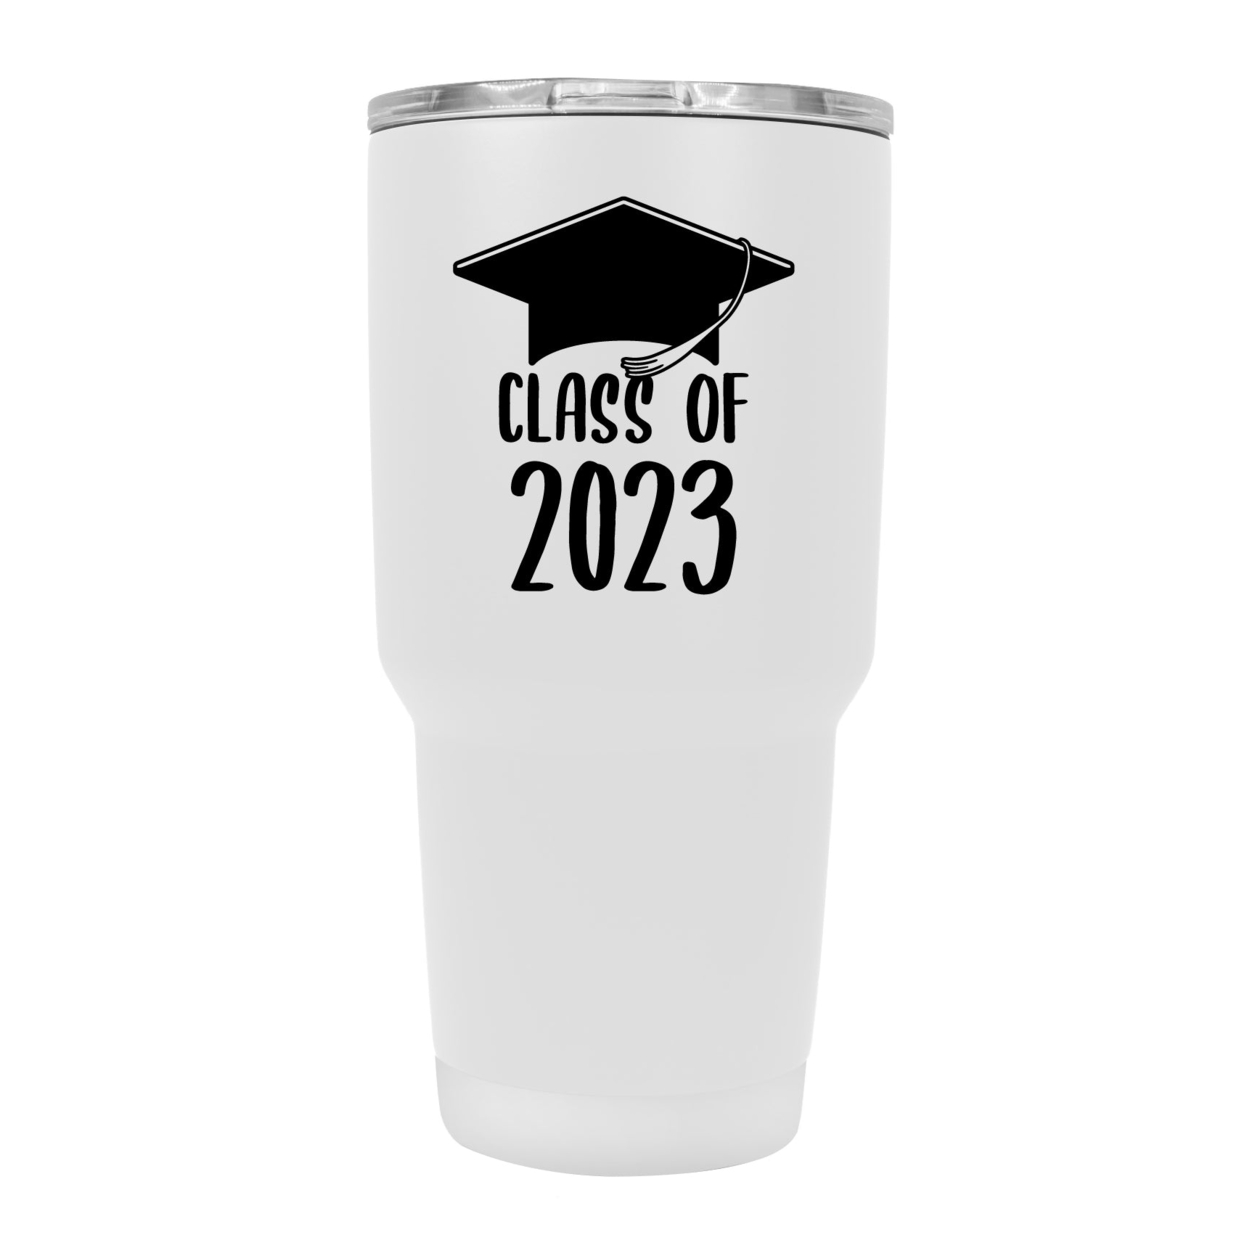 Class Of 2023 Graduation 24 Oz Insulated Stainless Steel Tumbler Navy - Seafoam